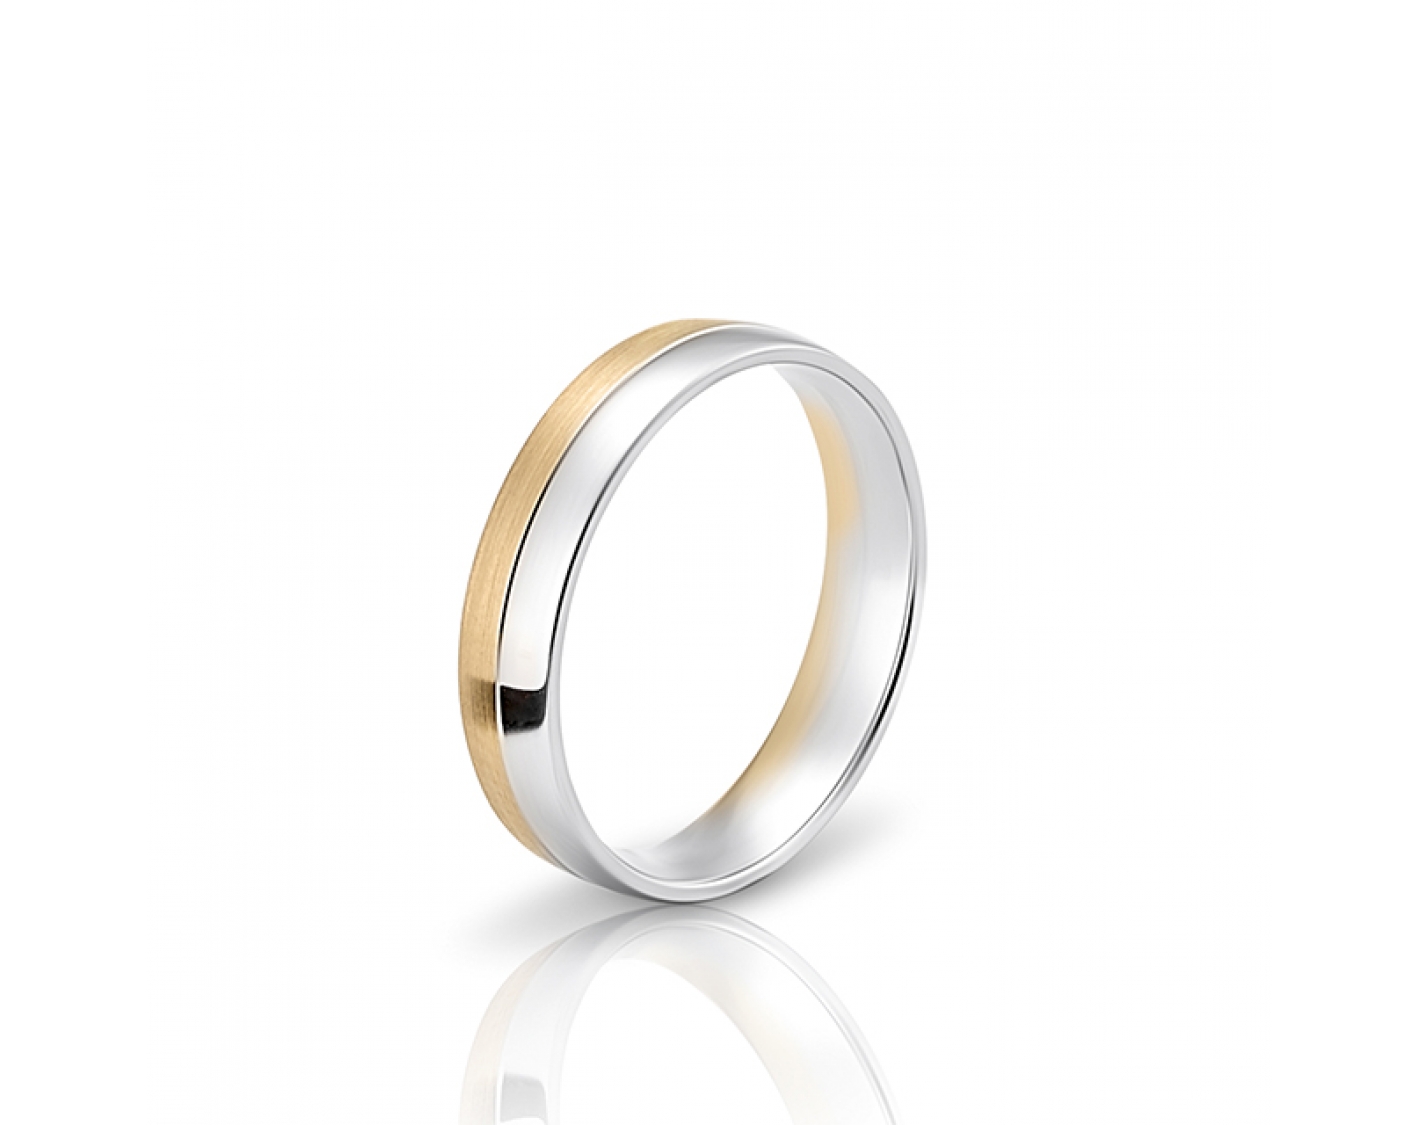 dual-tone 4,5mm two-toned* wedding band Photos & images